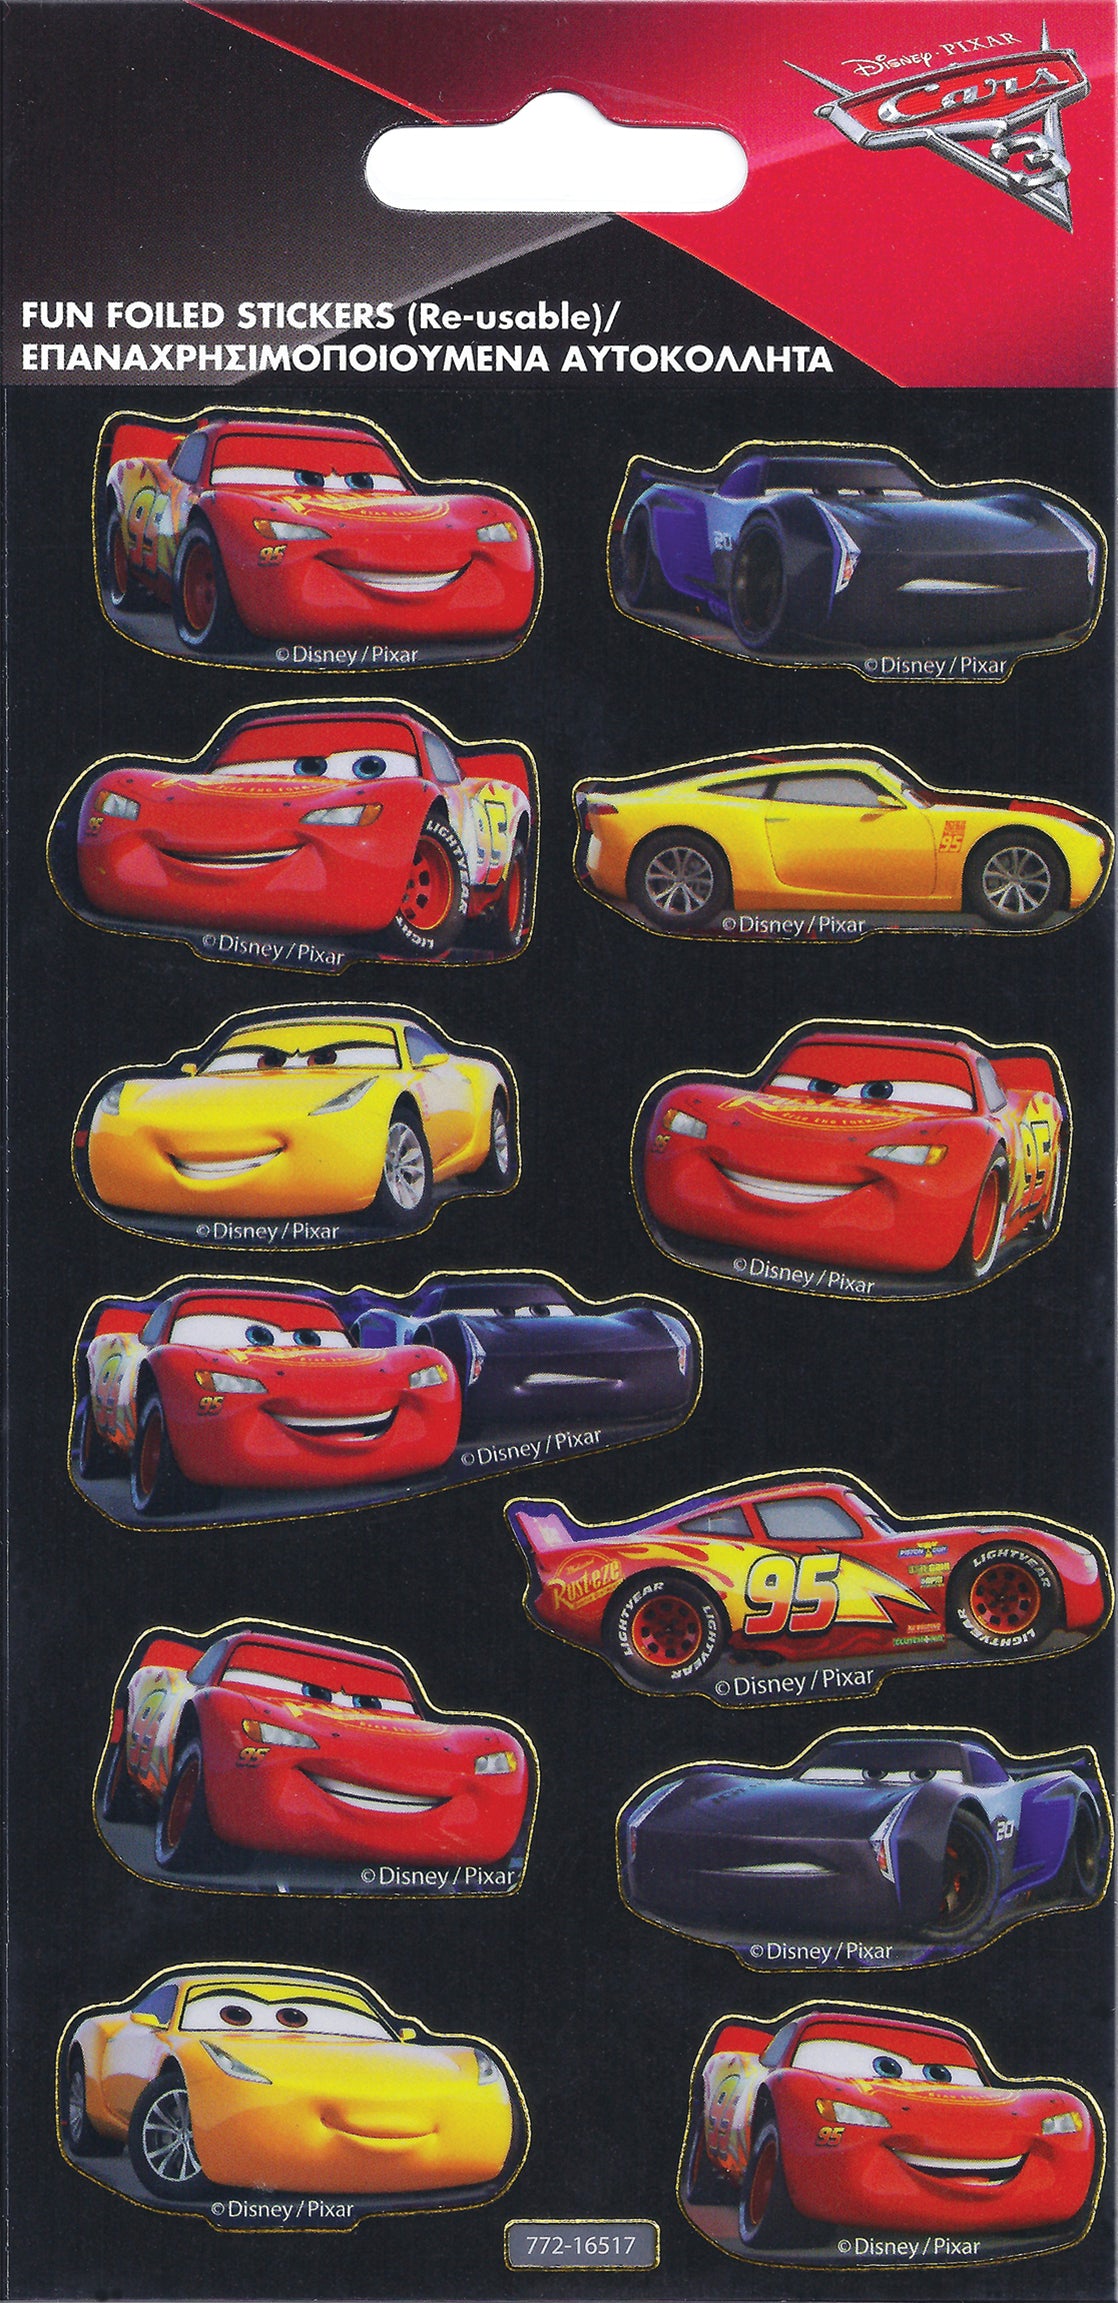 cars 3 characters